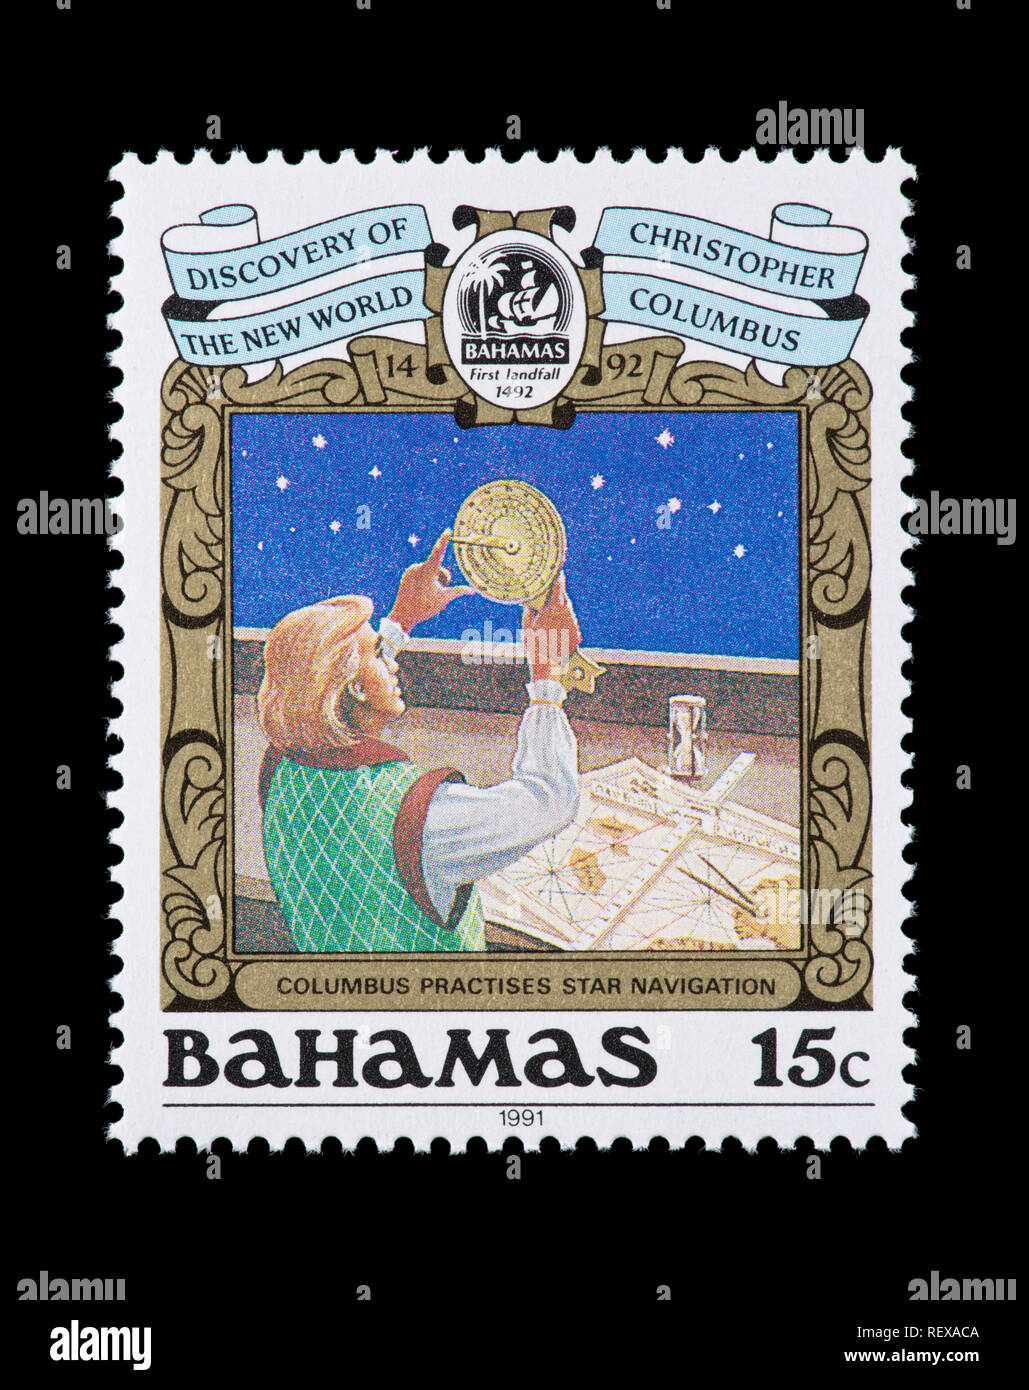 Postage stamp from Bahamas depicting Columbus practicing star navigation, 500th anniversary of the discovery of the Americas Stock Photo